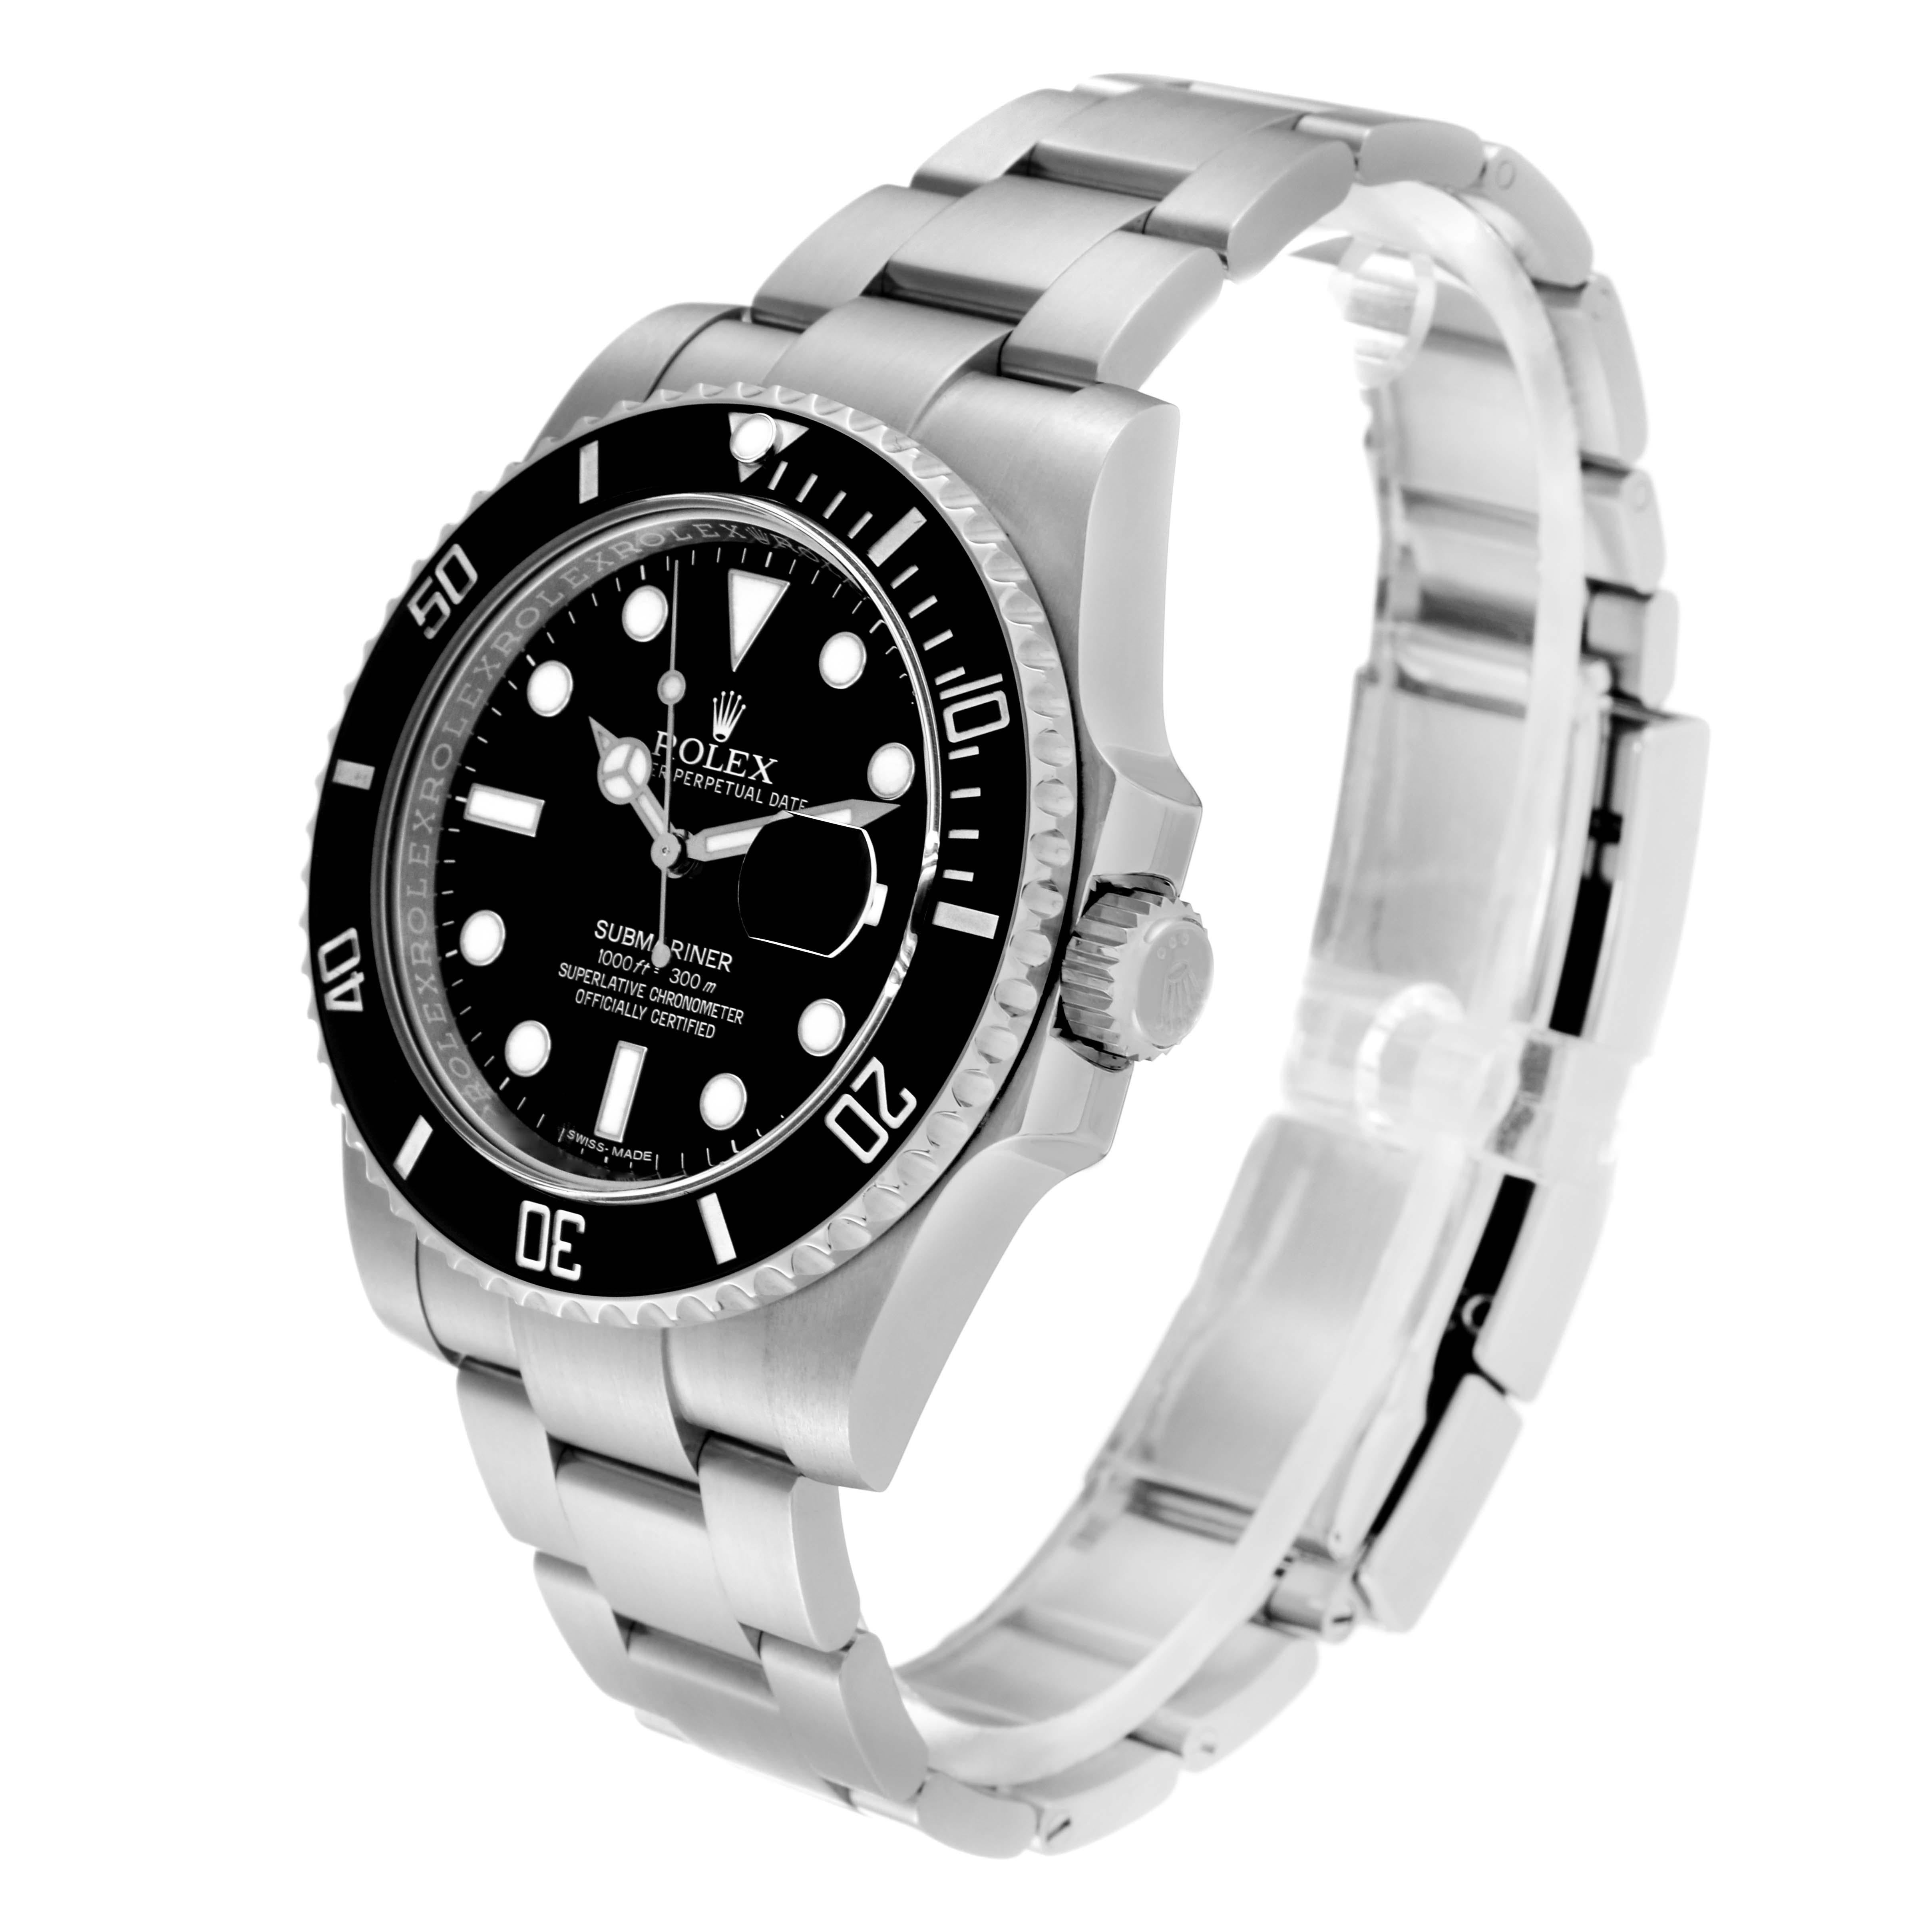 Rolex Submariner Date Black Dial Steel Mens Watch 116610 For Sale 4